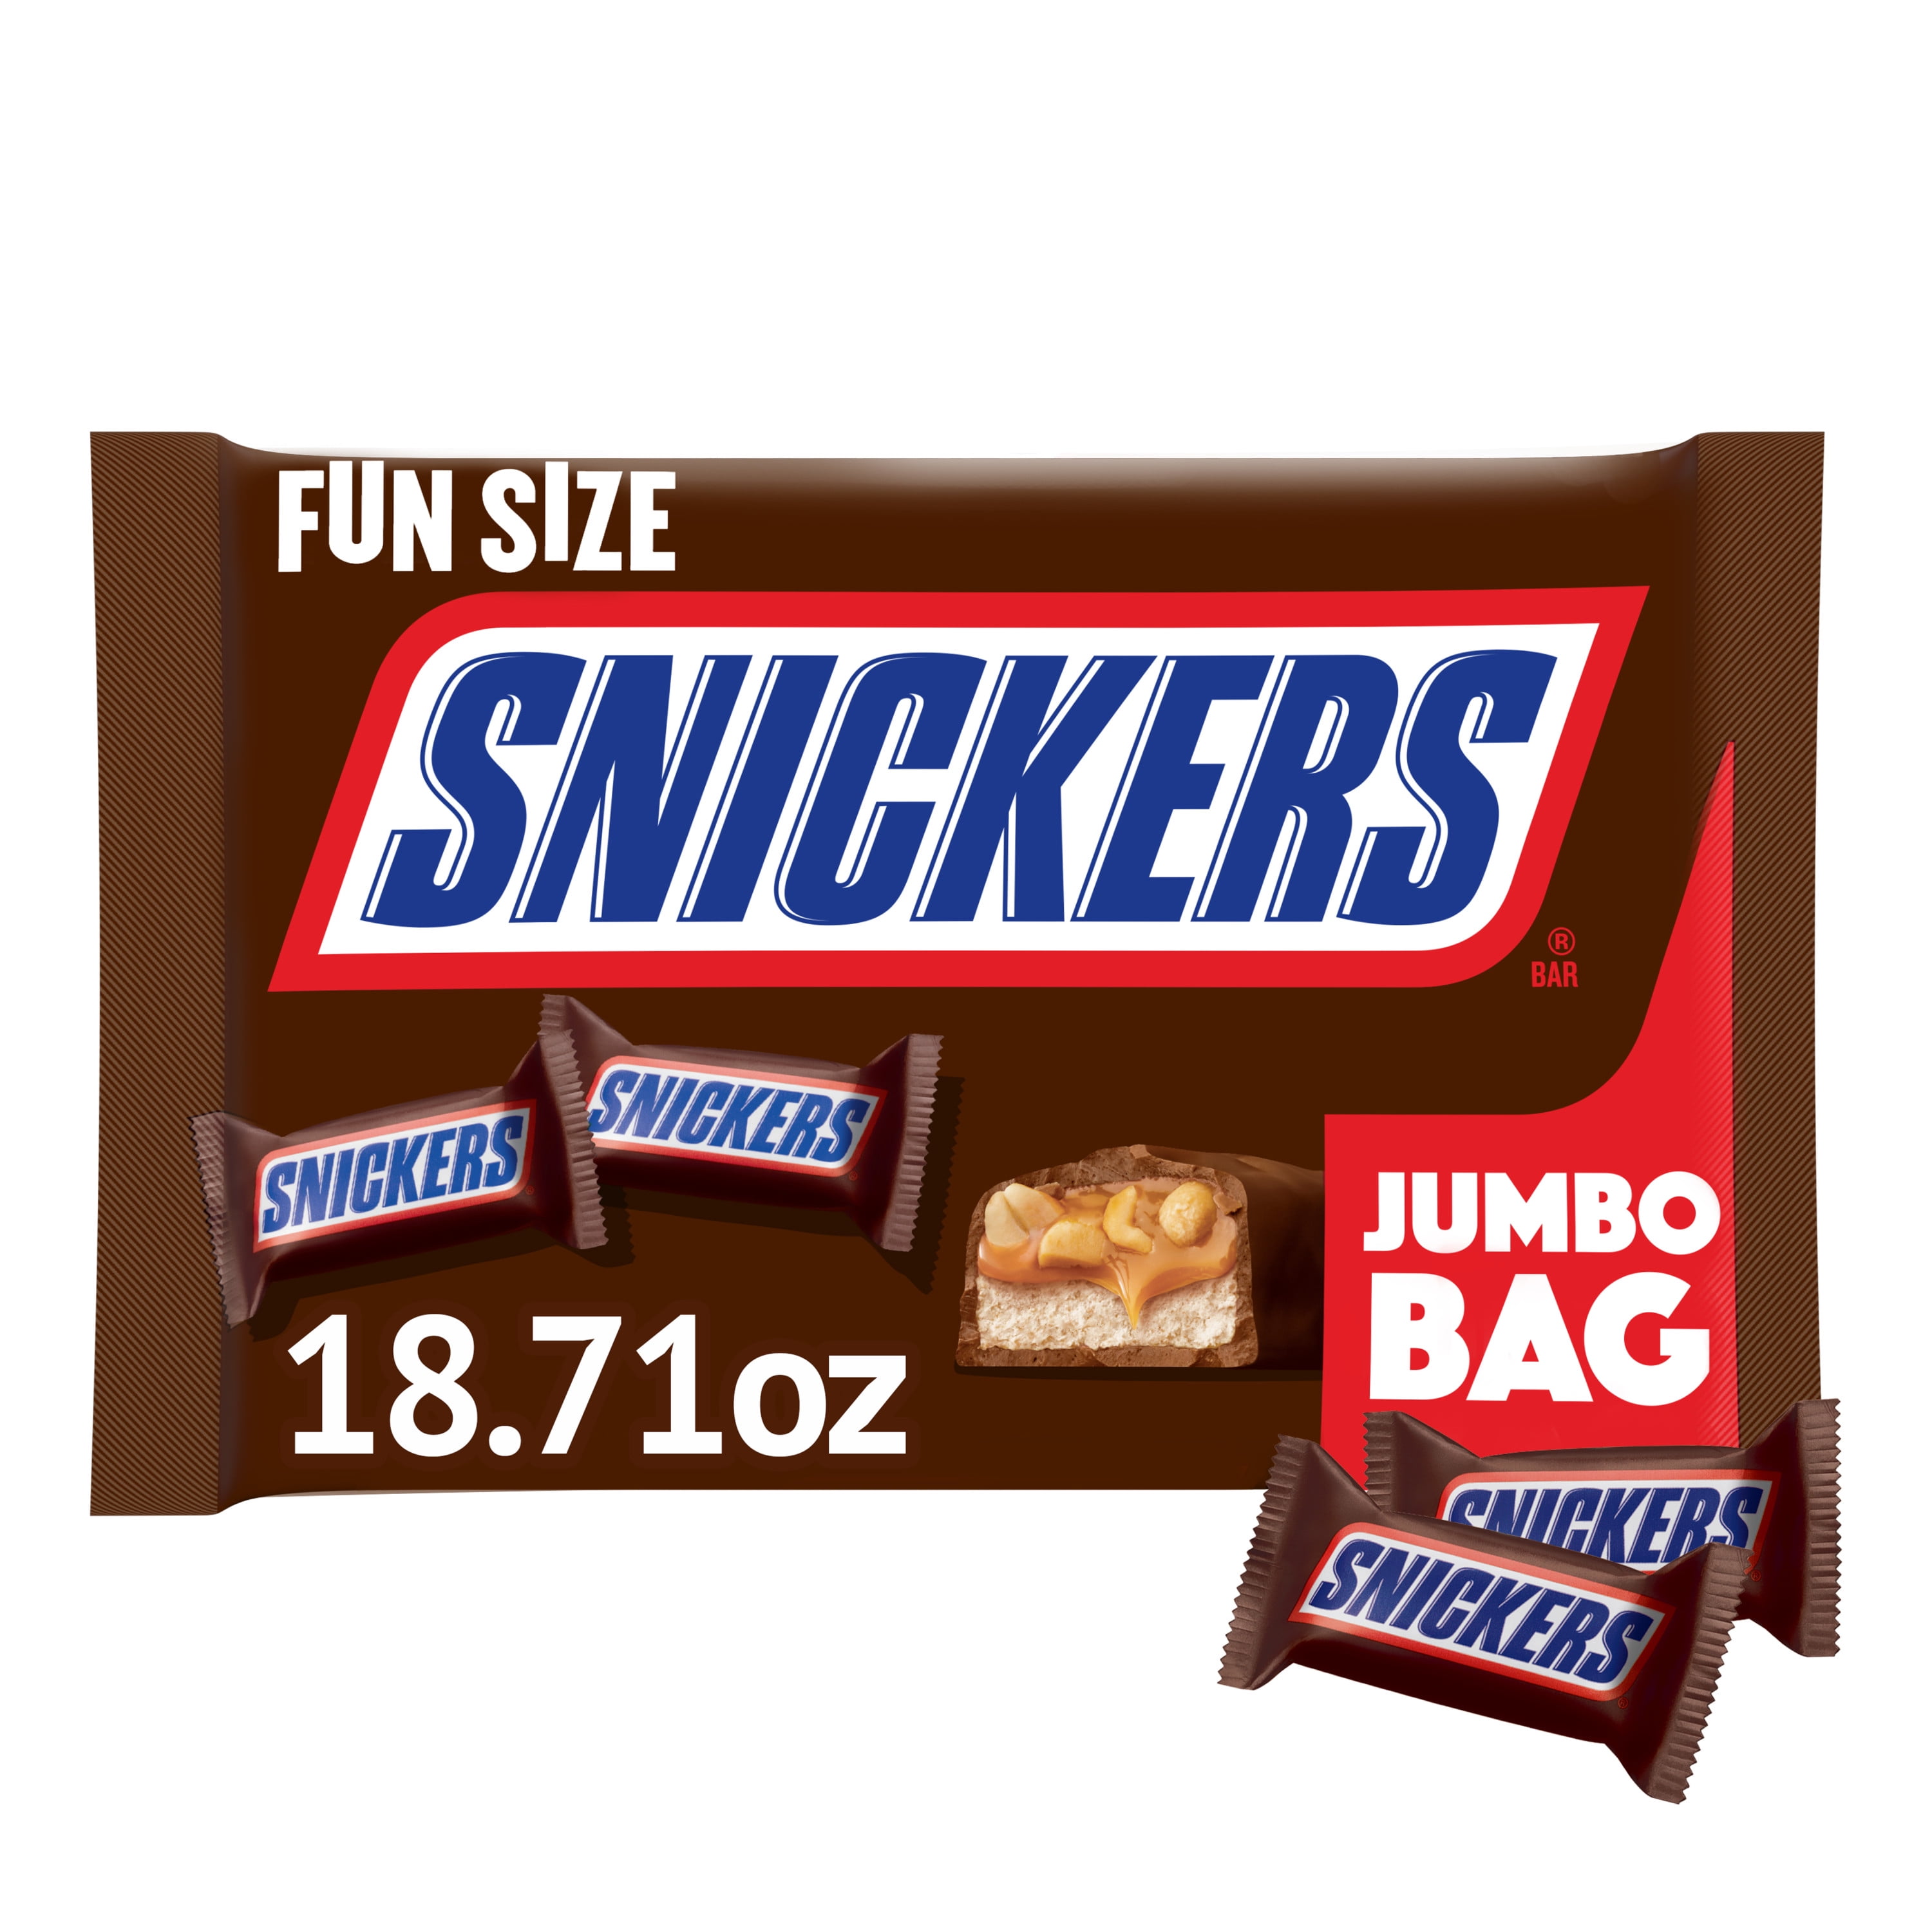 Snickers Candy Bars, Fun Size - 18.71 oz